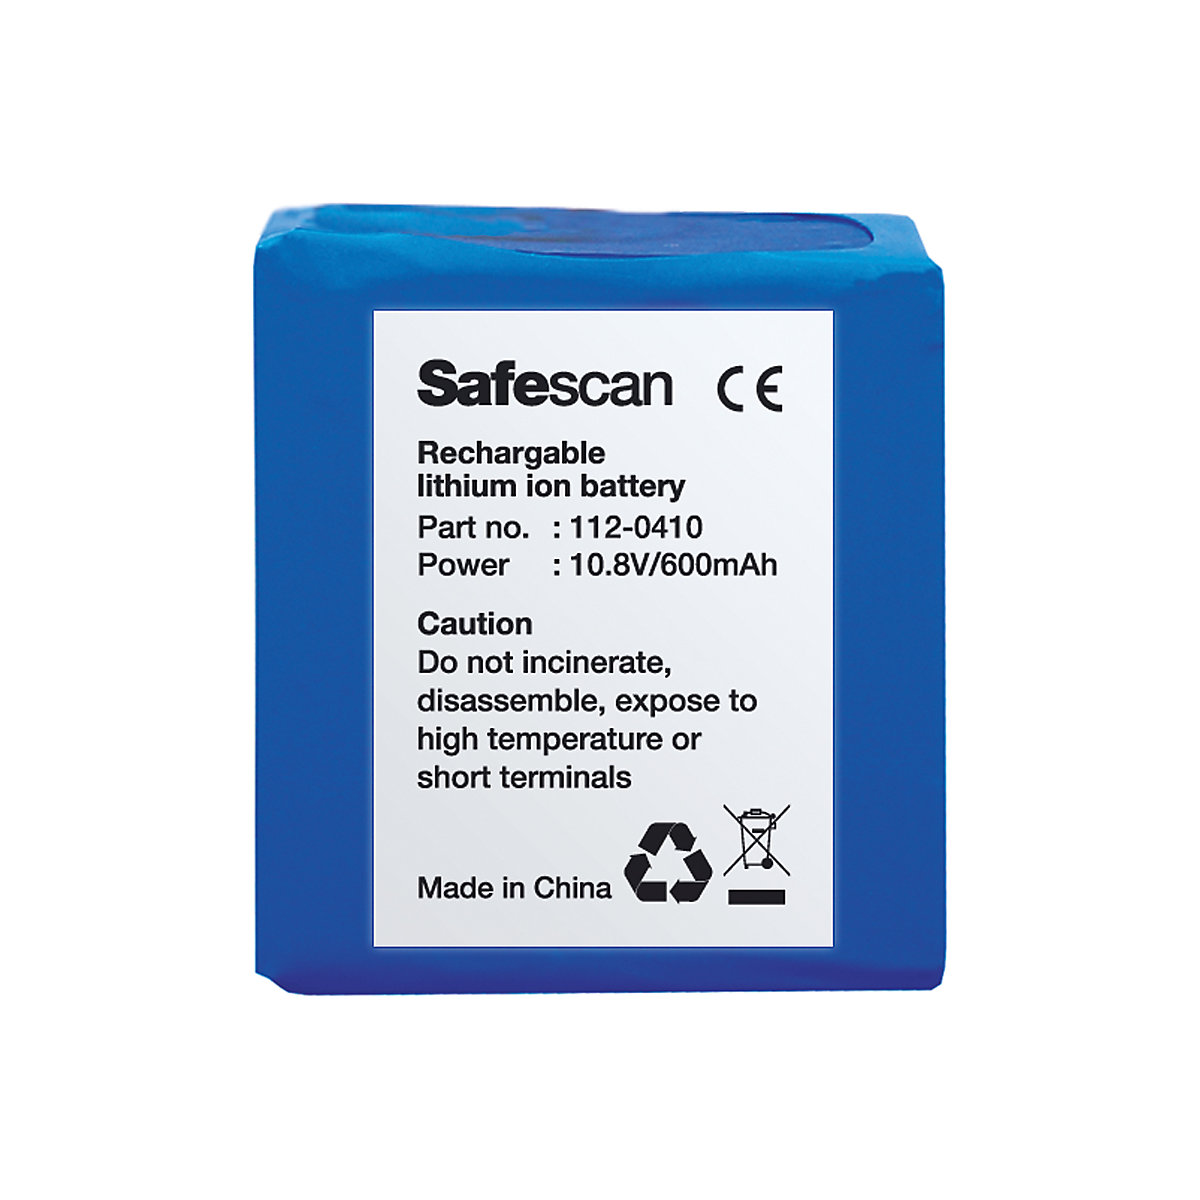 Rechargeable battery - Safescan